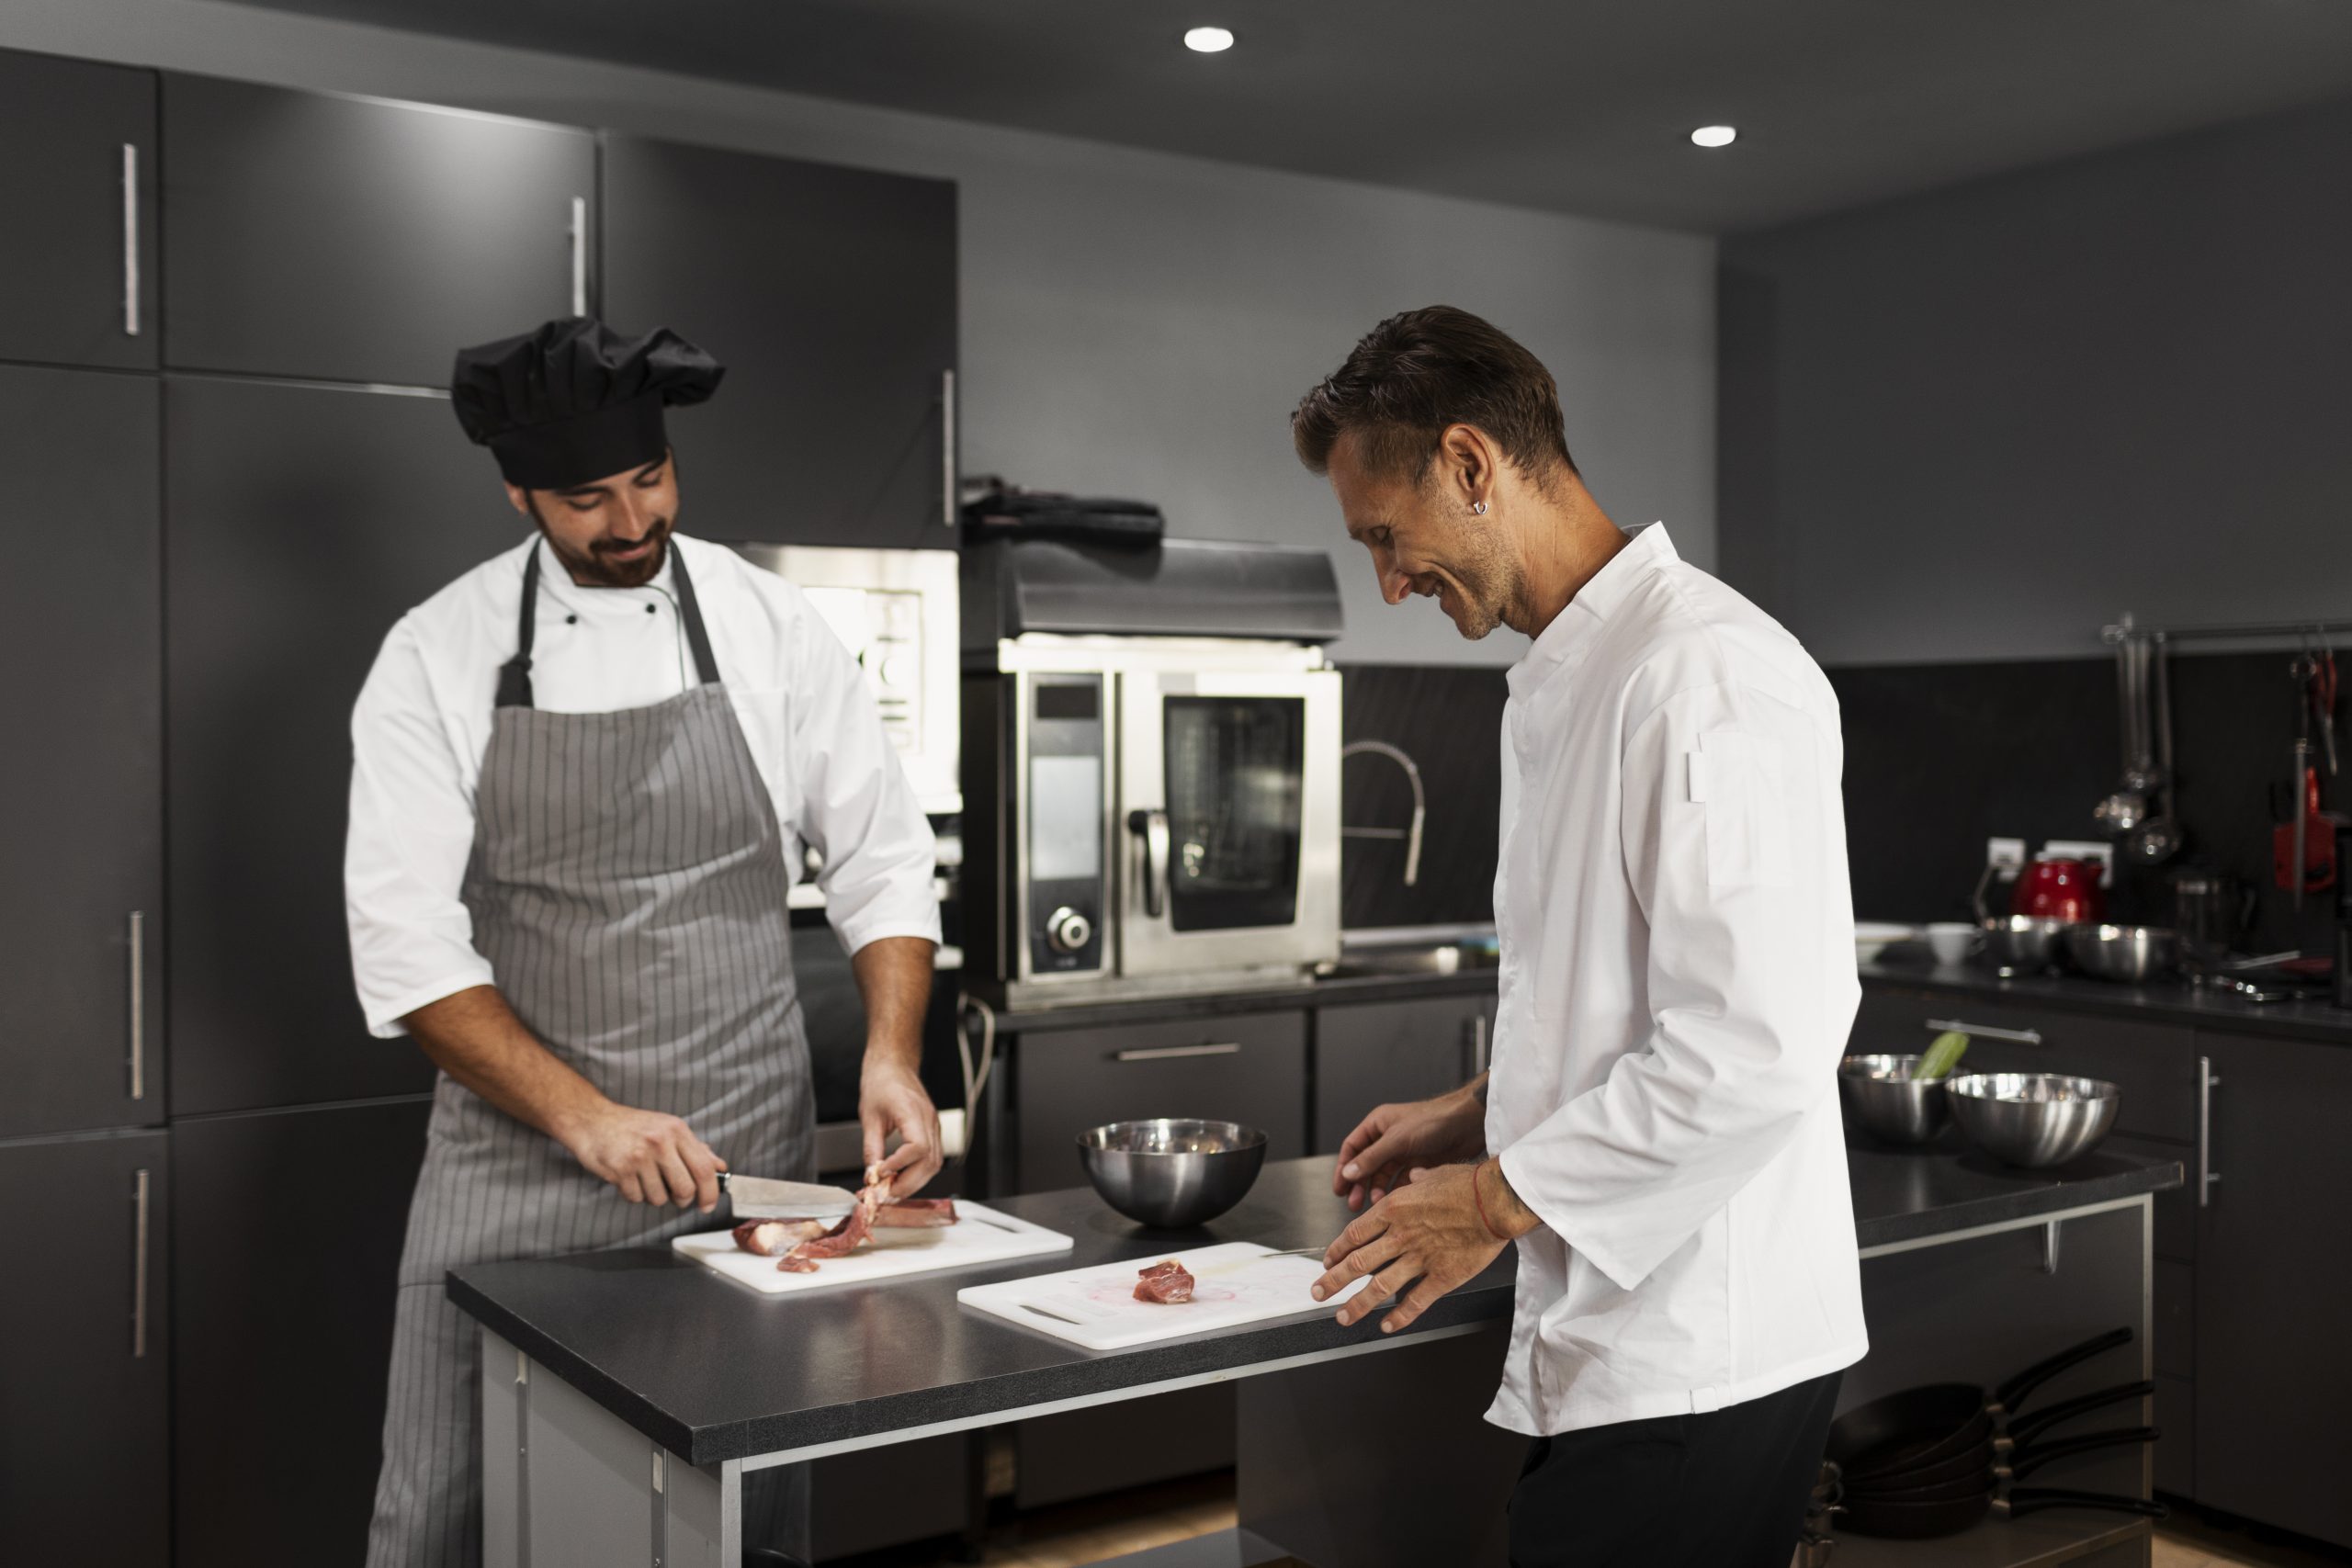 chef-working-together-professional-kitchen (1)